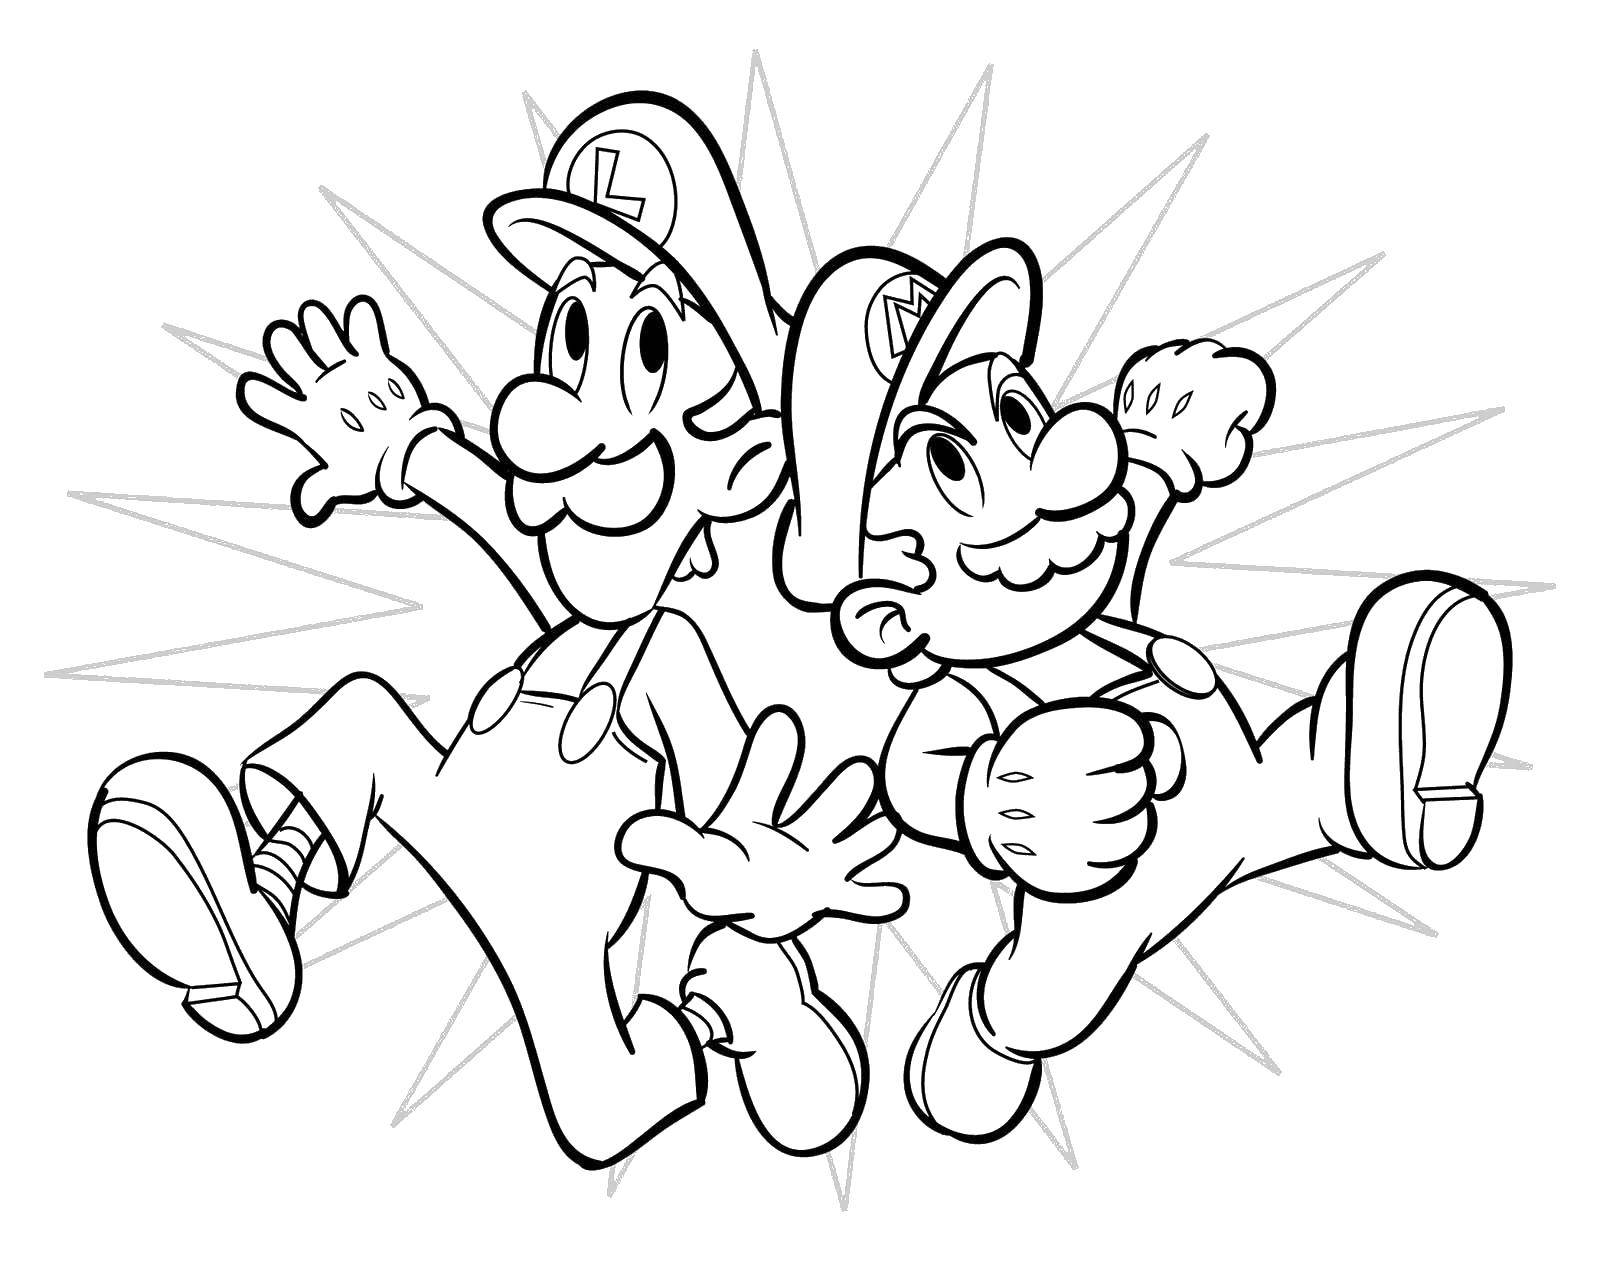 Coloring Friendly Mexican Mario brothers. Category For boys . Tags:  Games, Mario.